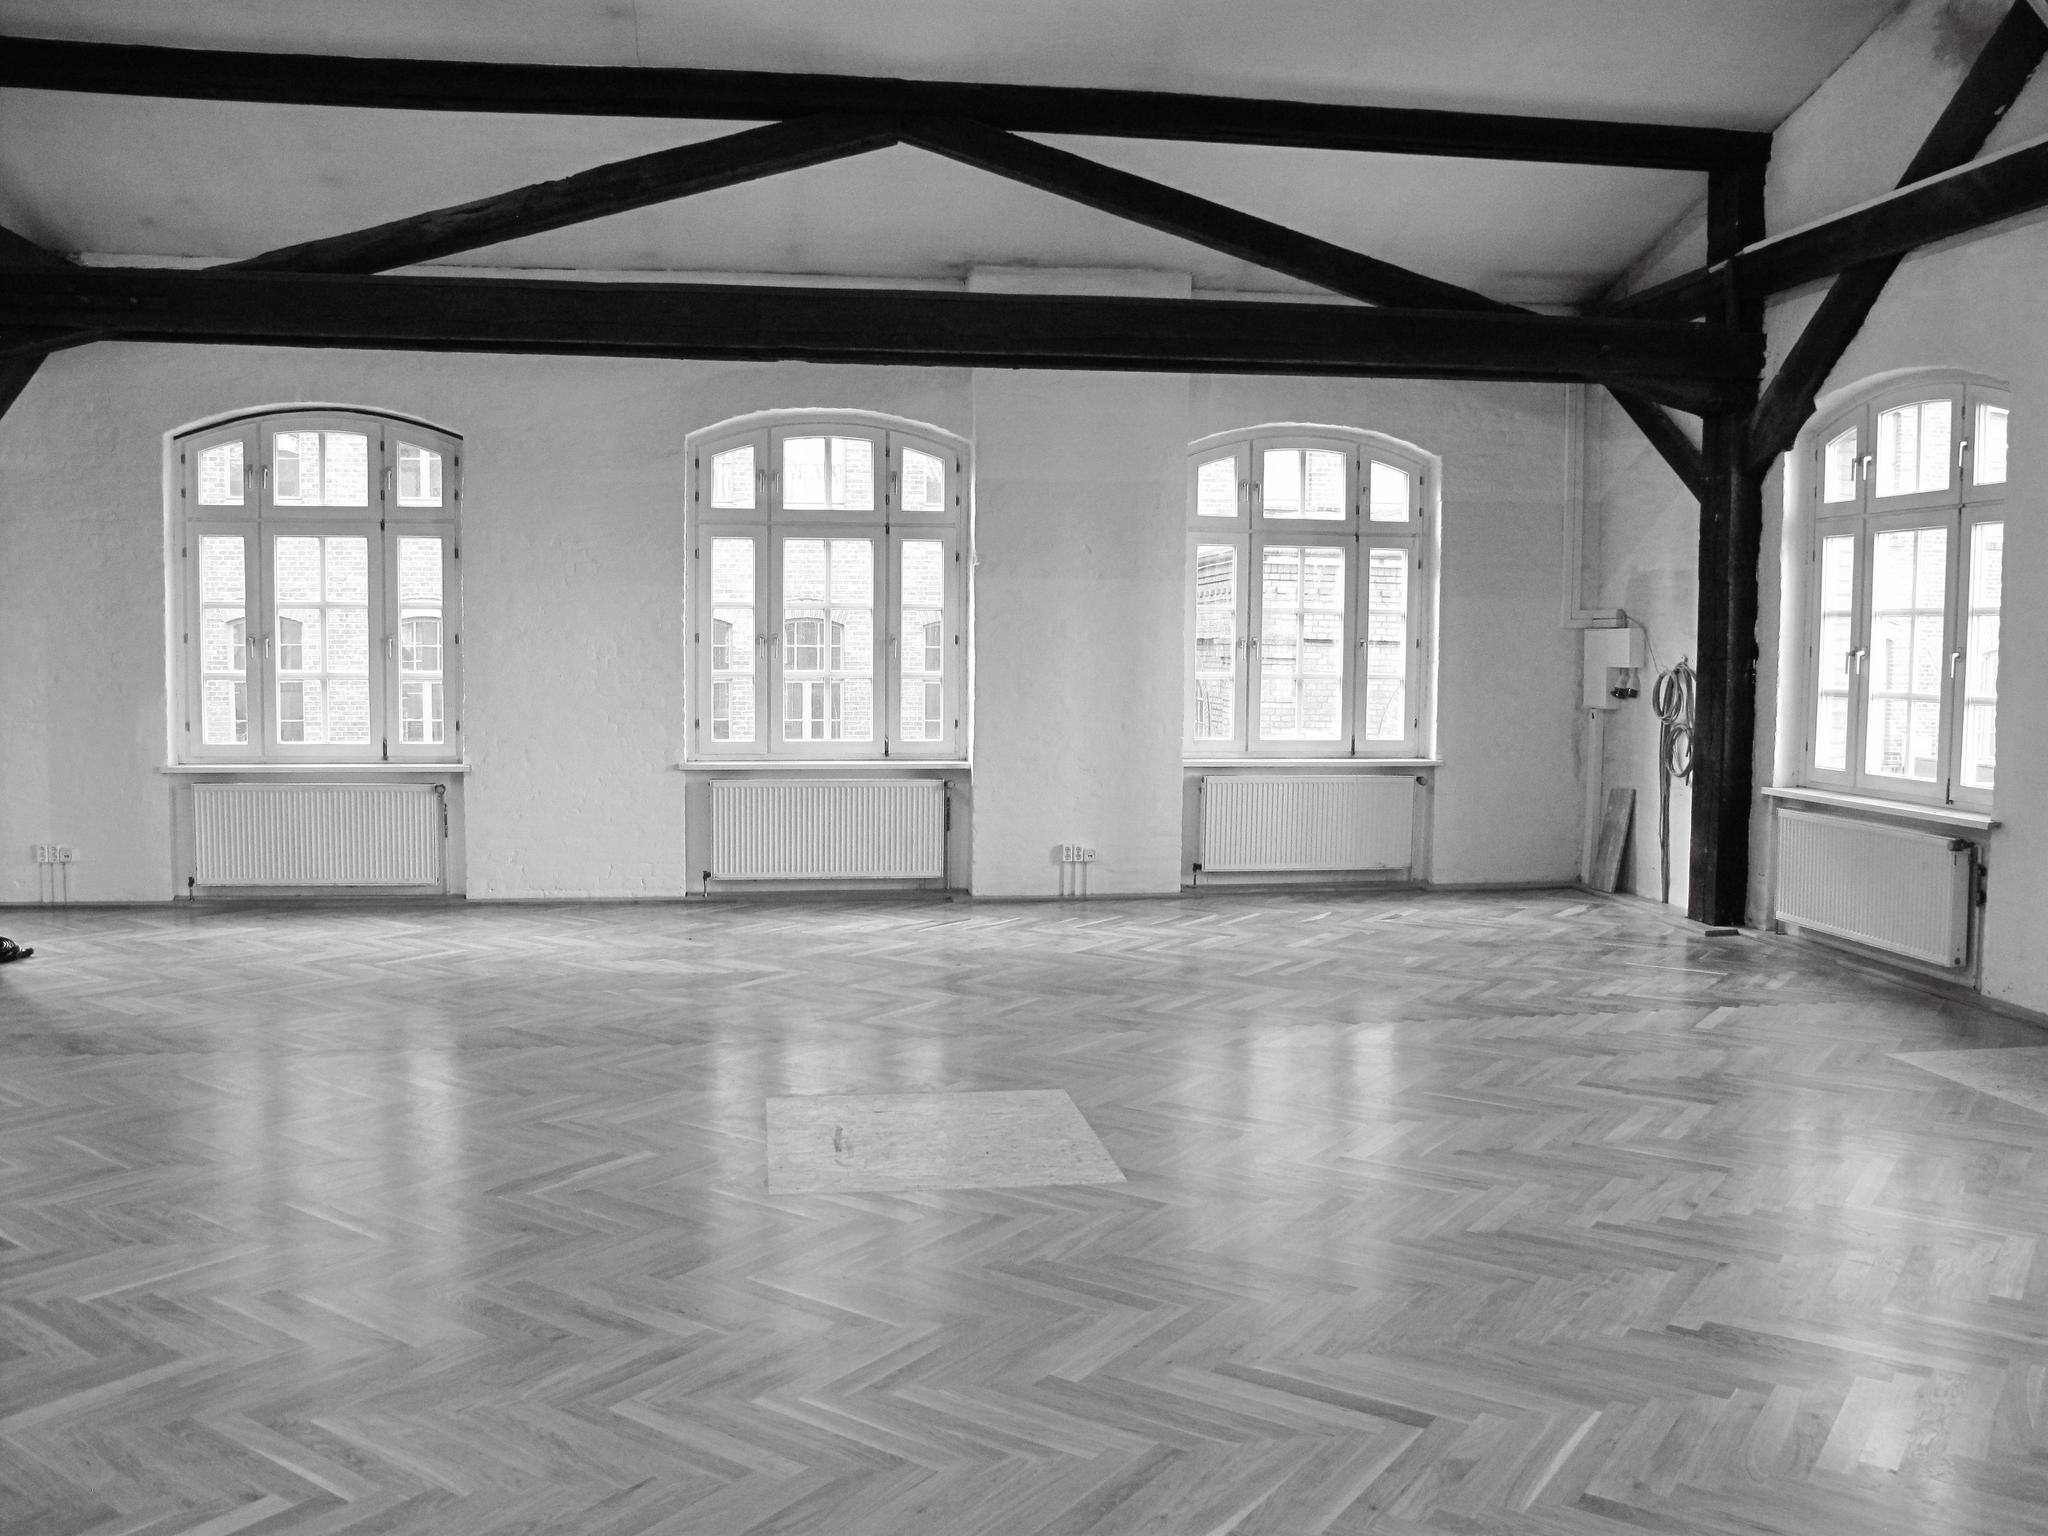 A wide shot of the studio space. Ambient light comes in through 4 arched altbau windows and dark wooden beams frame the high, triangular ceiling. The light from the windows reflects off of clean zigzagged parquet flooring.